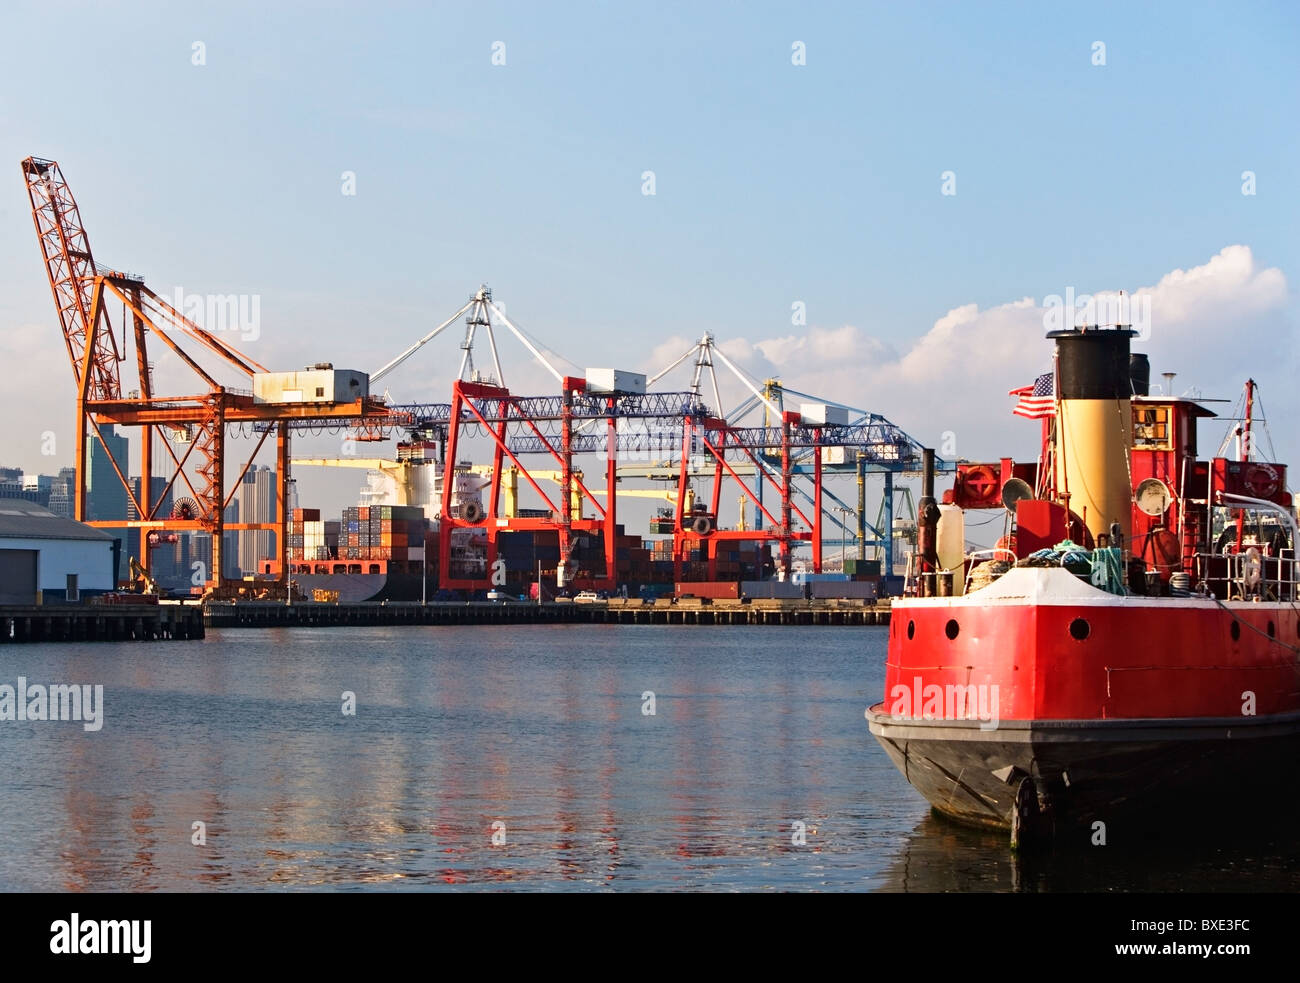 Cargo ships and container crane Stock Photo